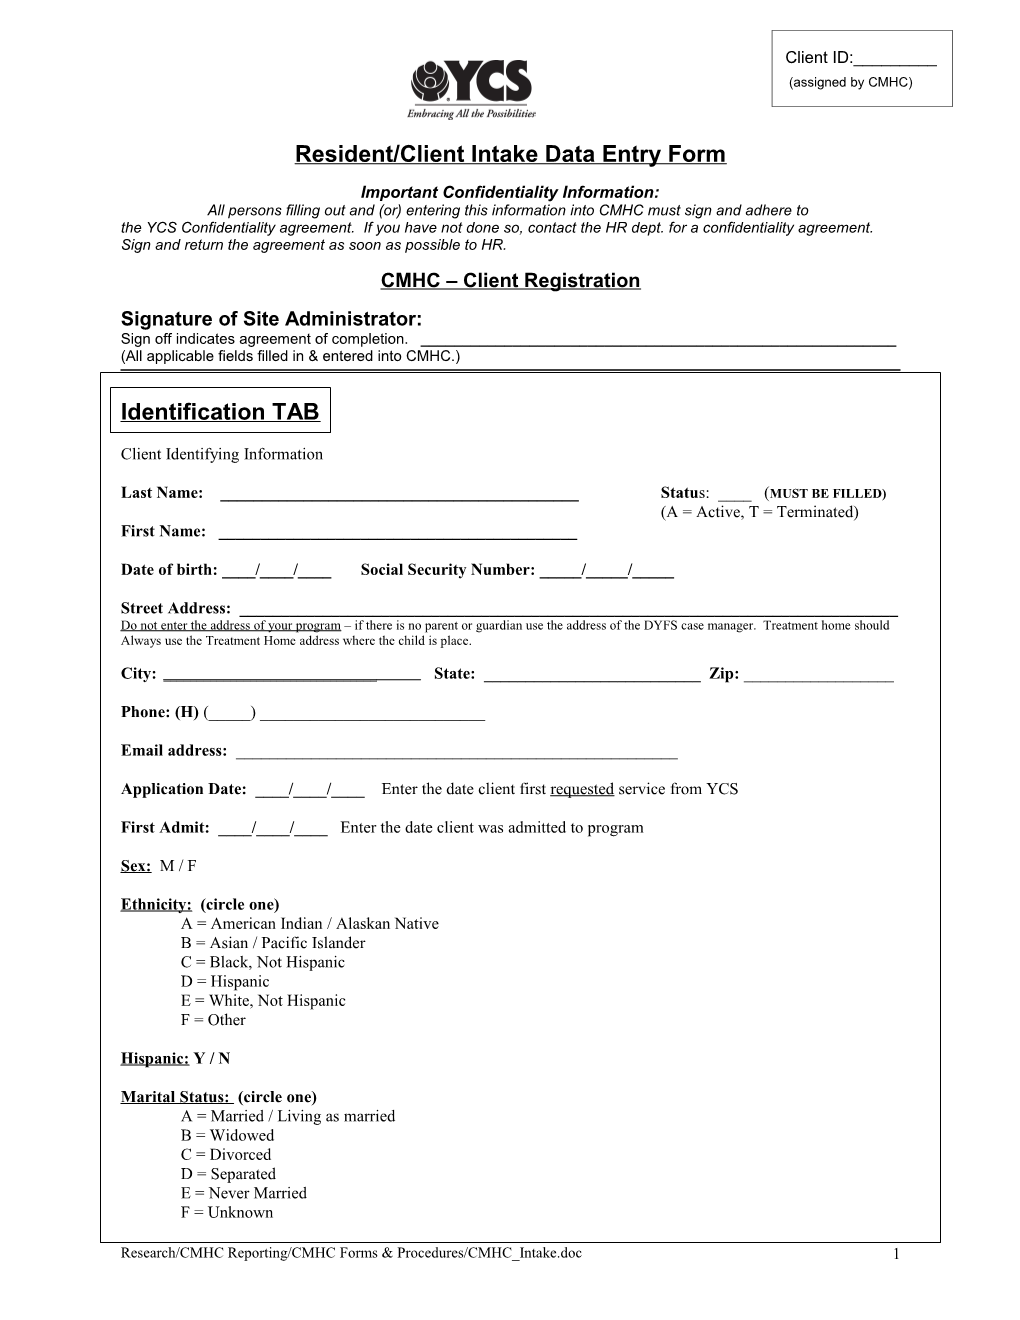 Resident/Client Intake Data Entry Form